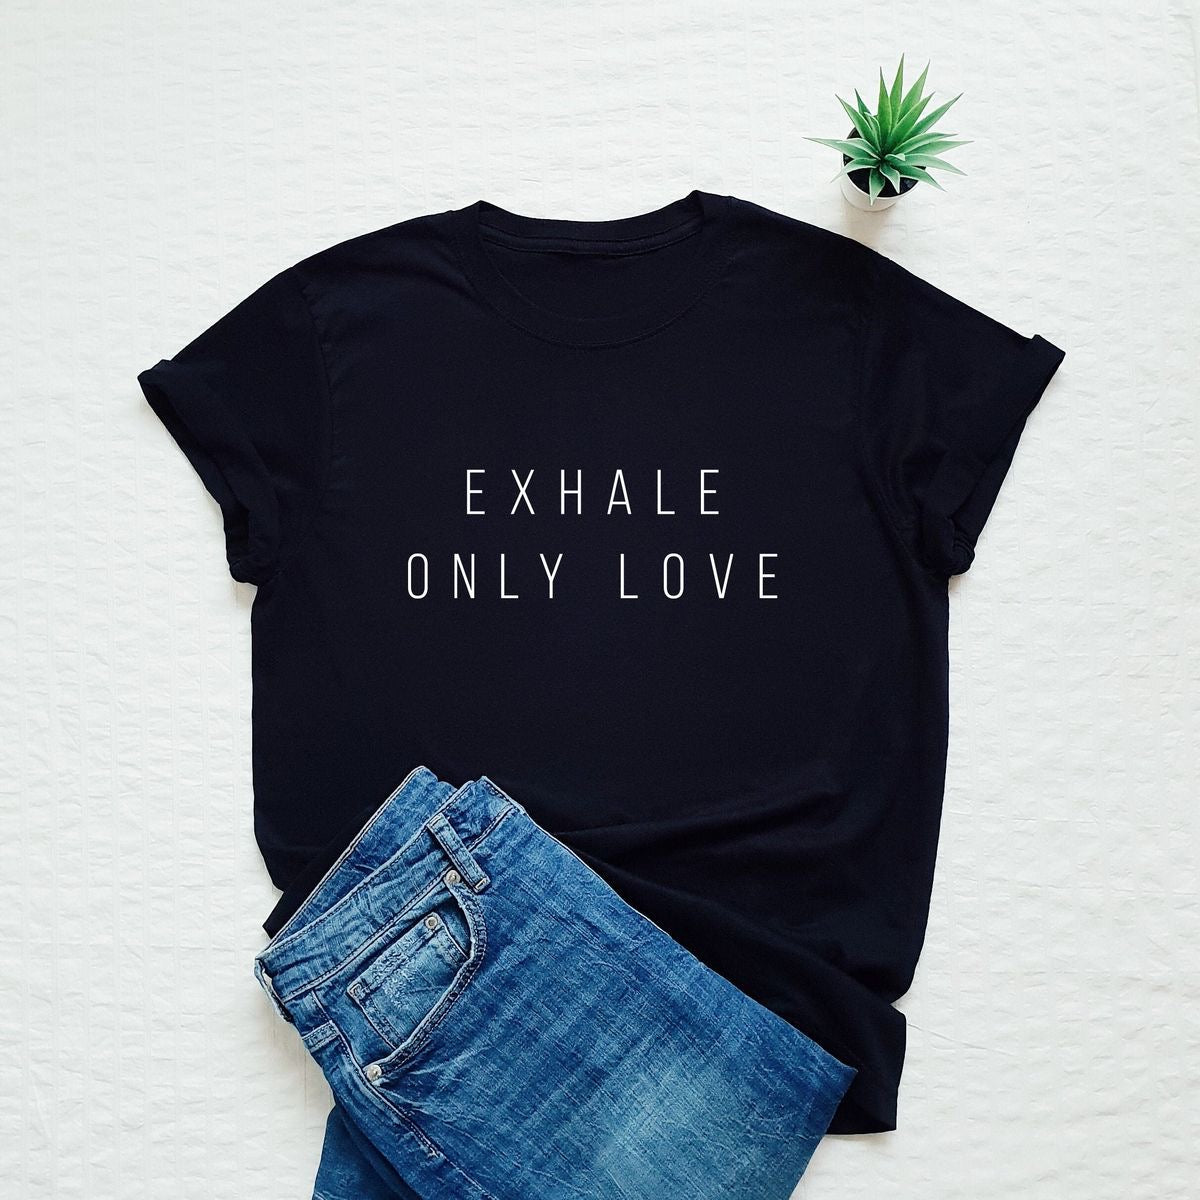 Exhale Only Love Printed Unisex T-Shirt